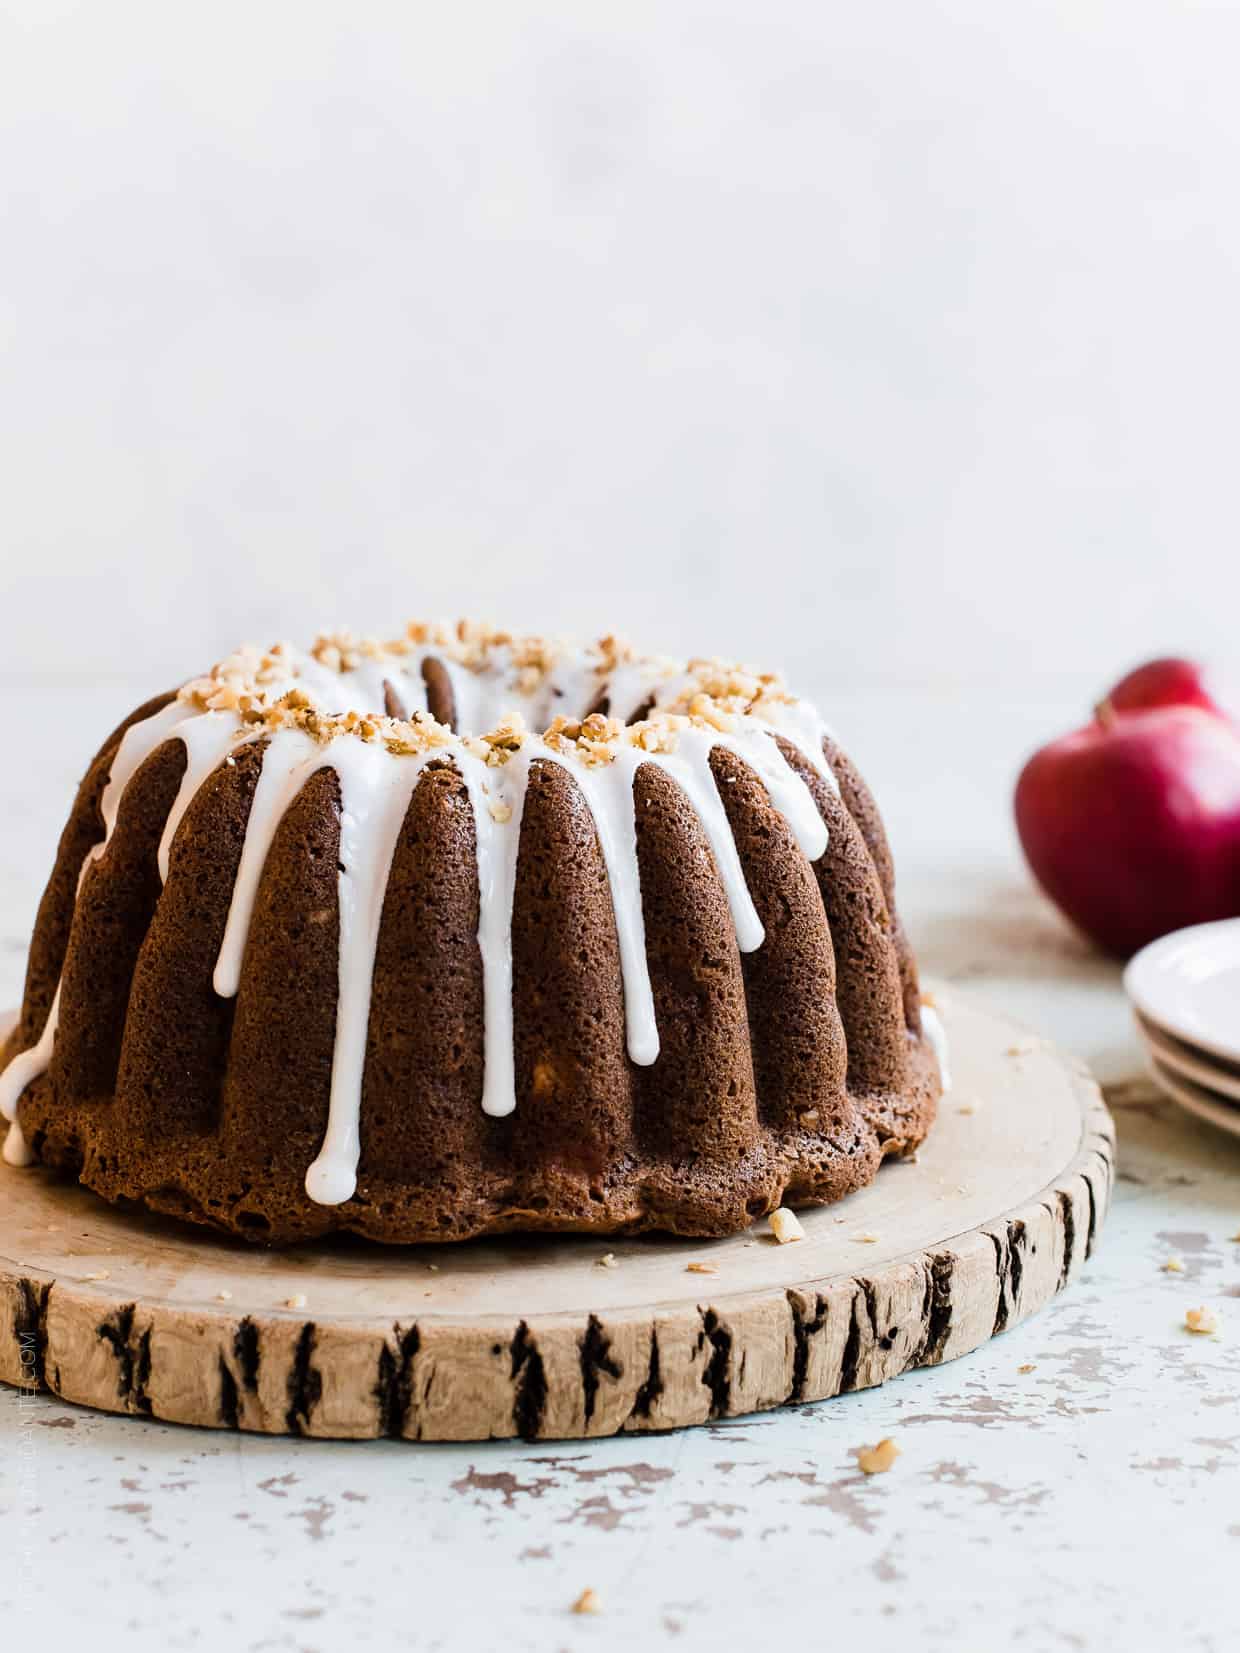 Apple Walnut Delight Cake frosted with glaze and displayed on a wooden serving board.